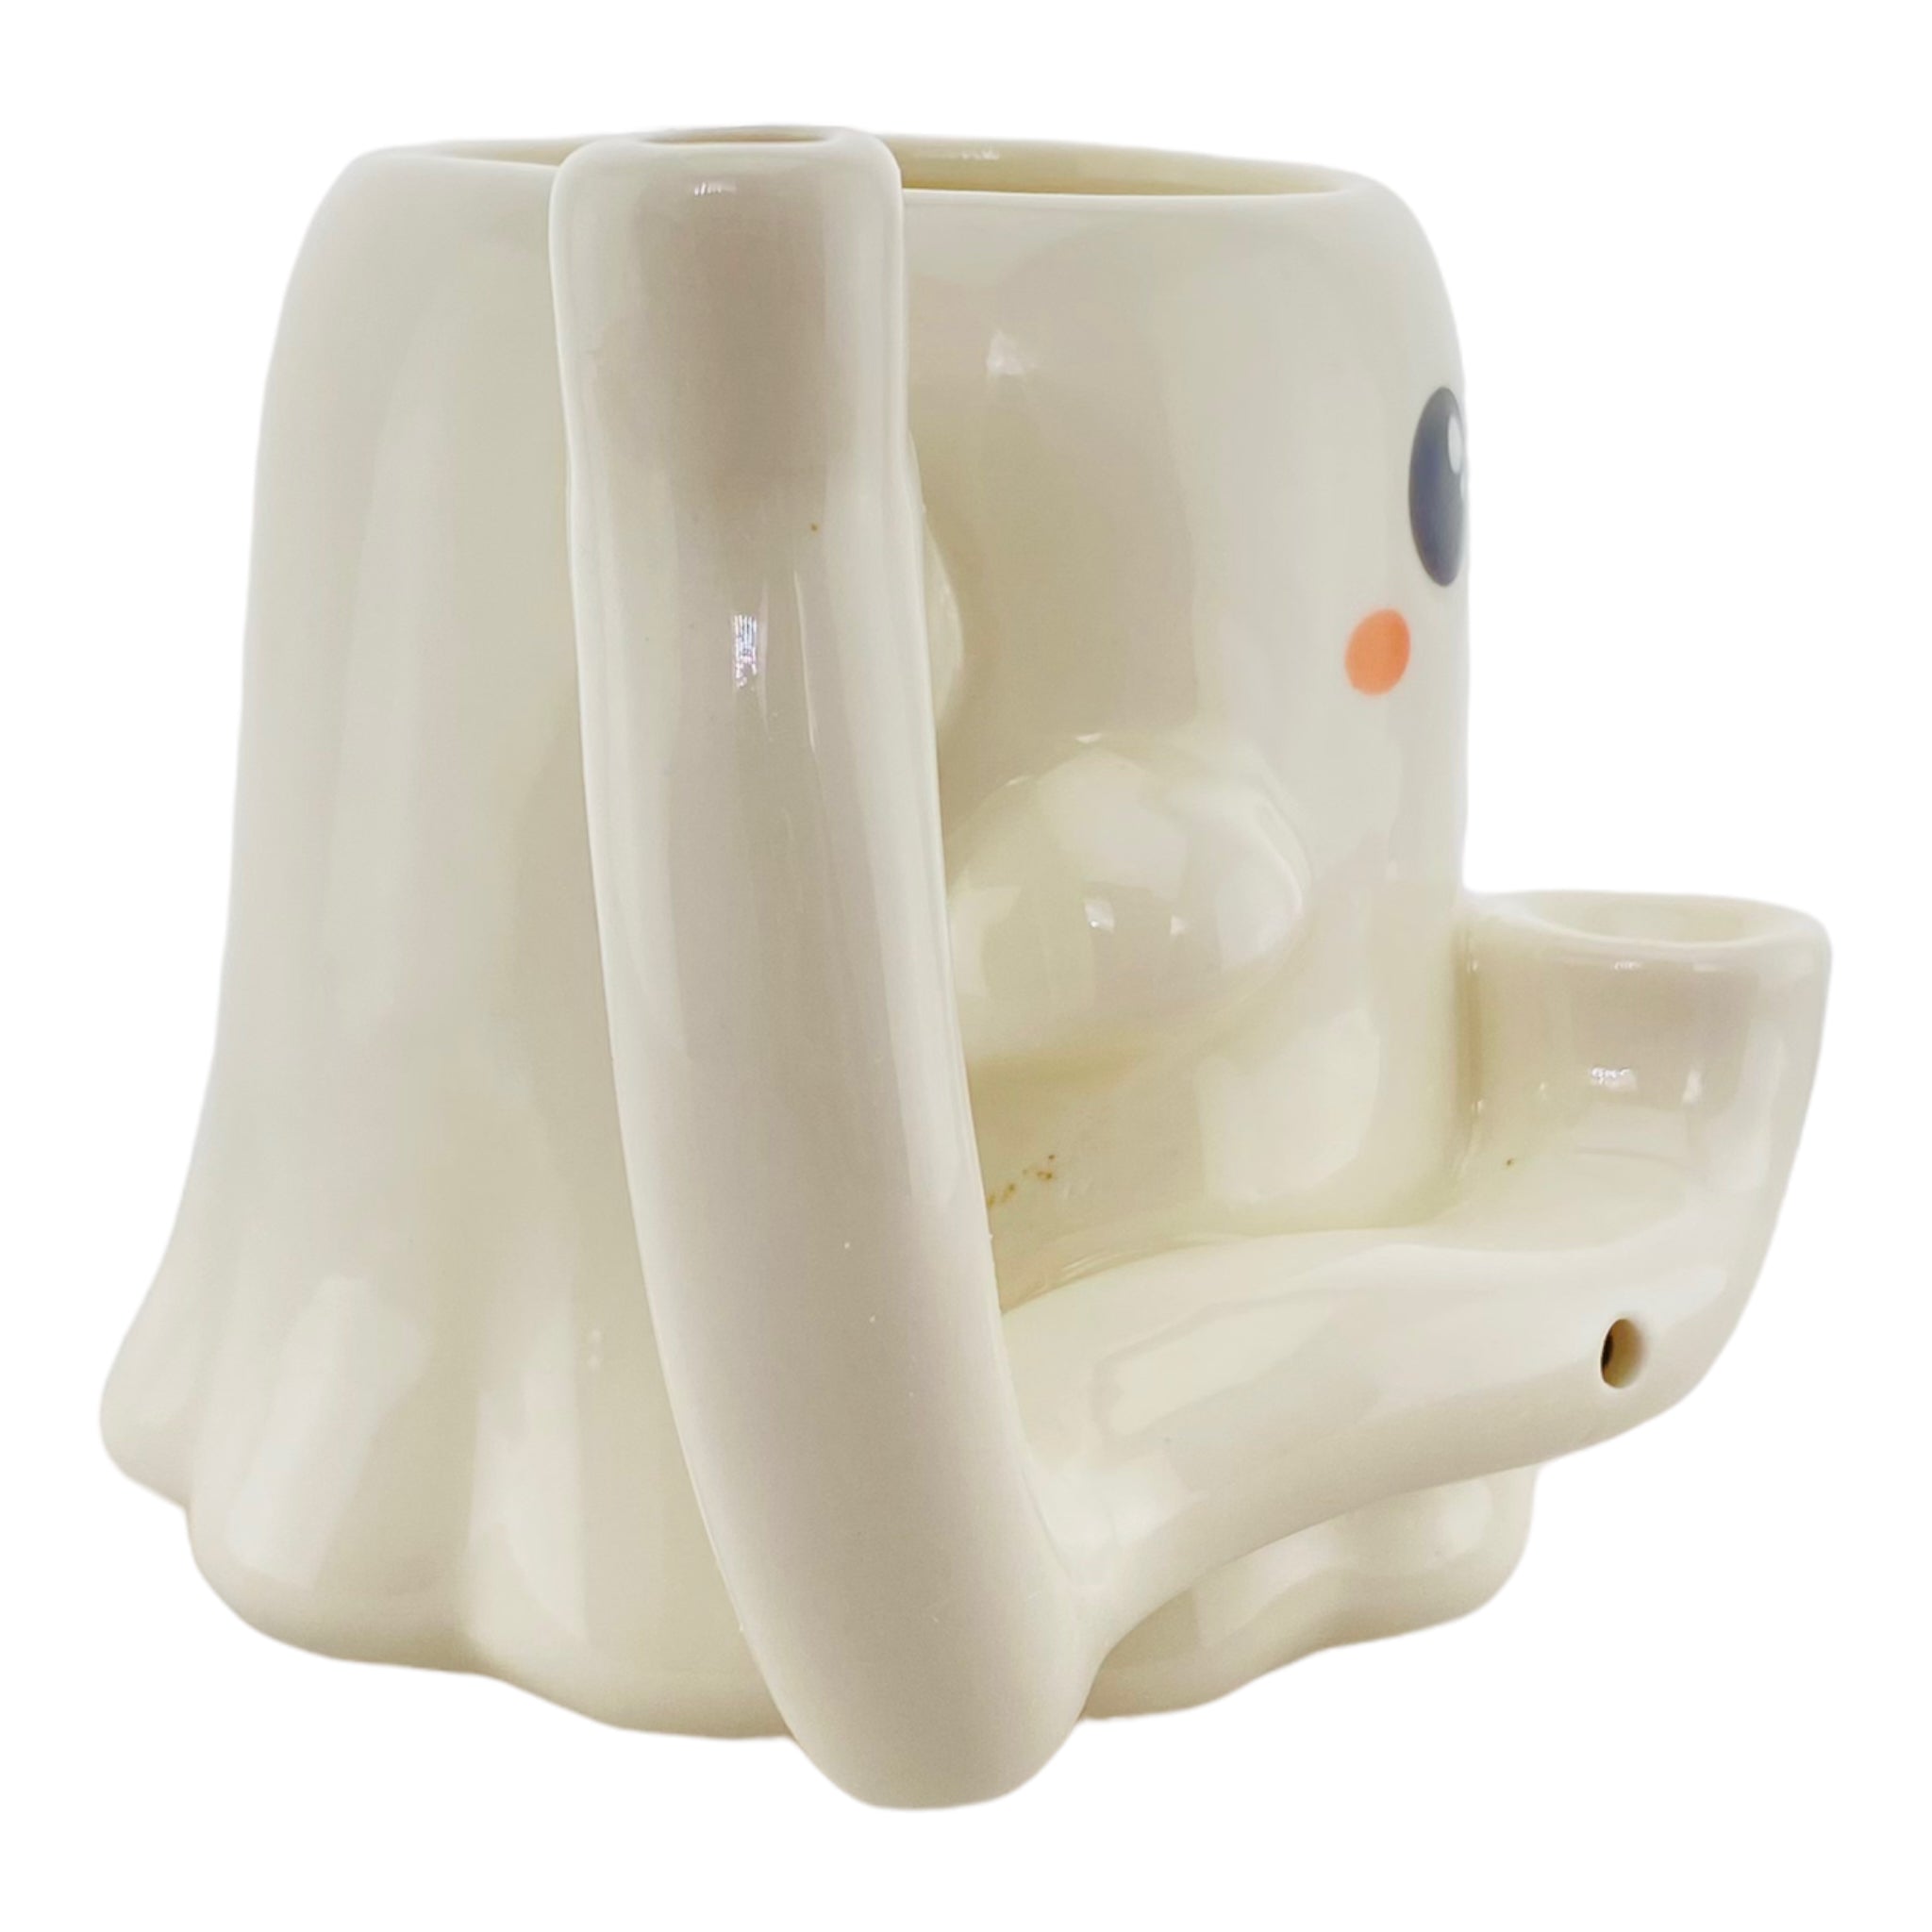 Wake & Bake Ceramic Ghost Coffee Cup & Hand Pipe